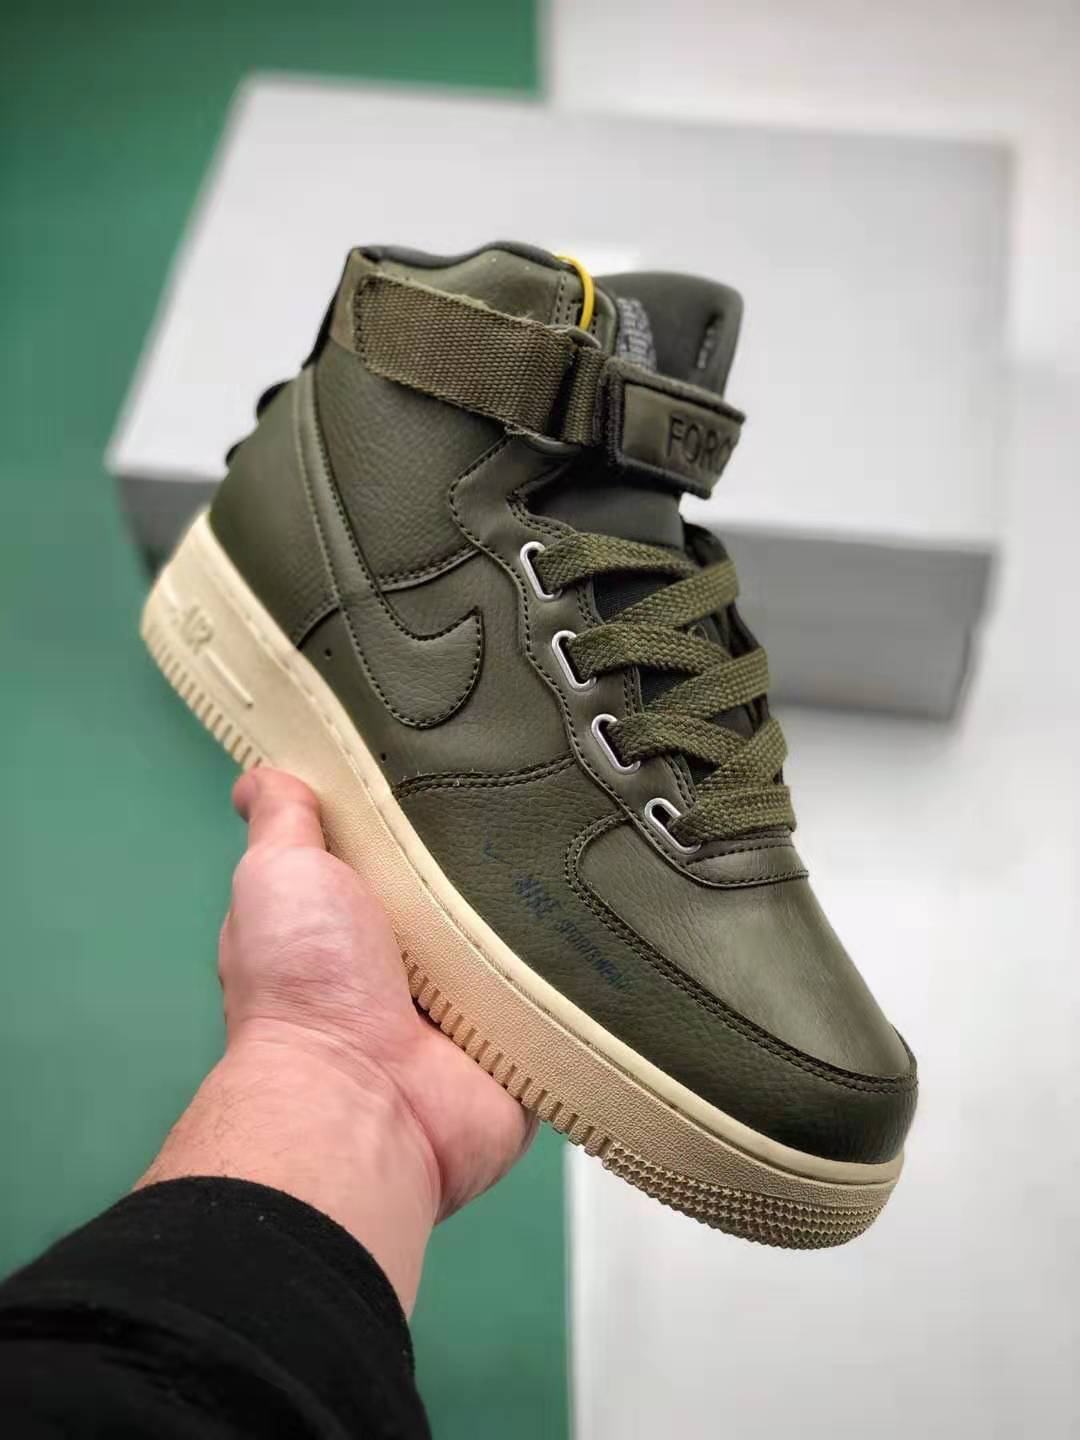 Nike Air Force 1 High Utility Olive Canvas AJ7311-300 - Stylish and Functional Footwear